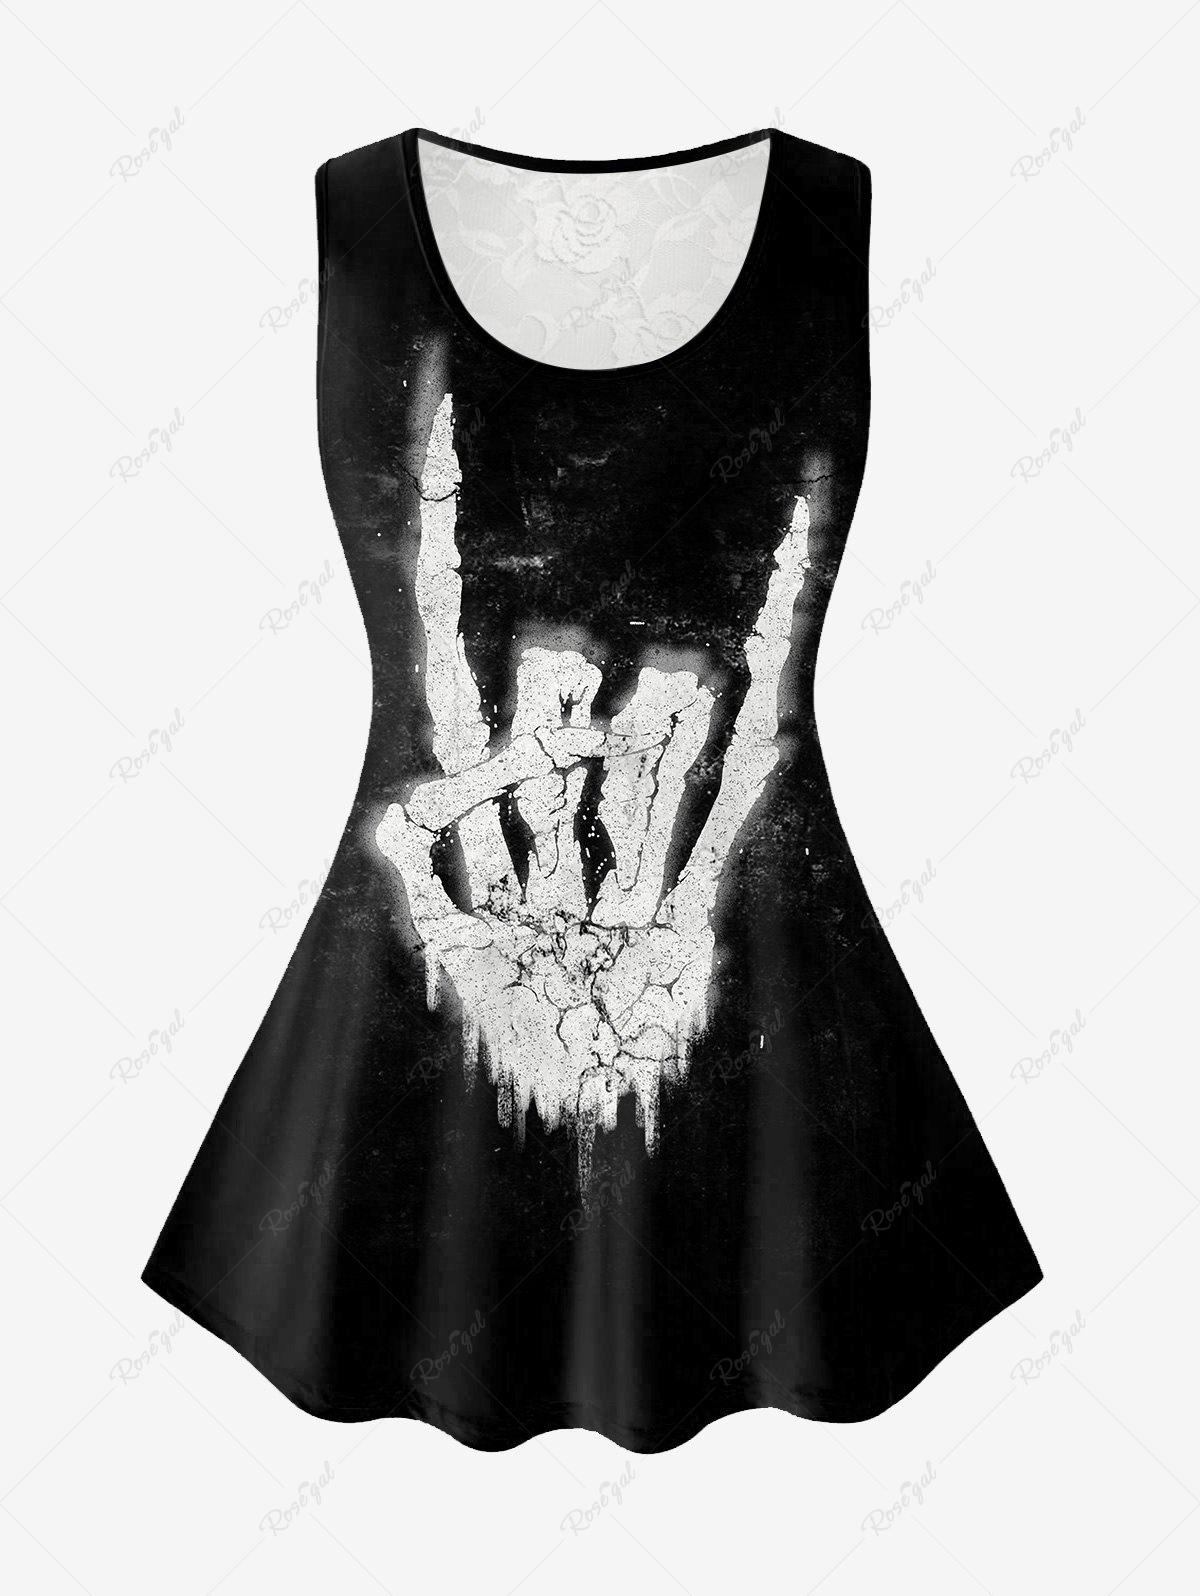 💗Tabbytragedy Loves💗 Gothic 3D Print Lace Panel Sleeveless Top